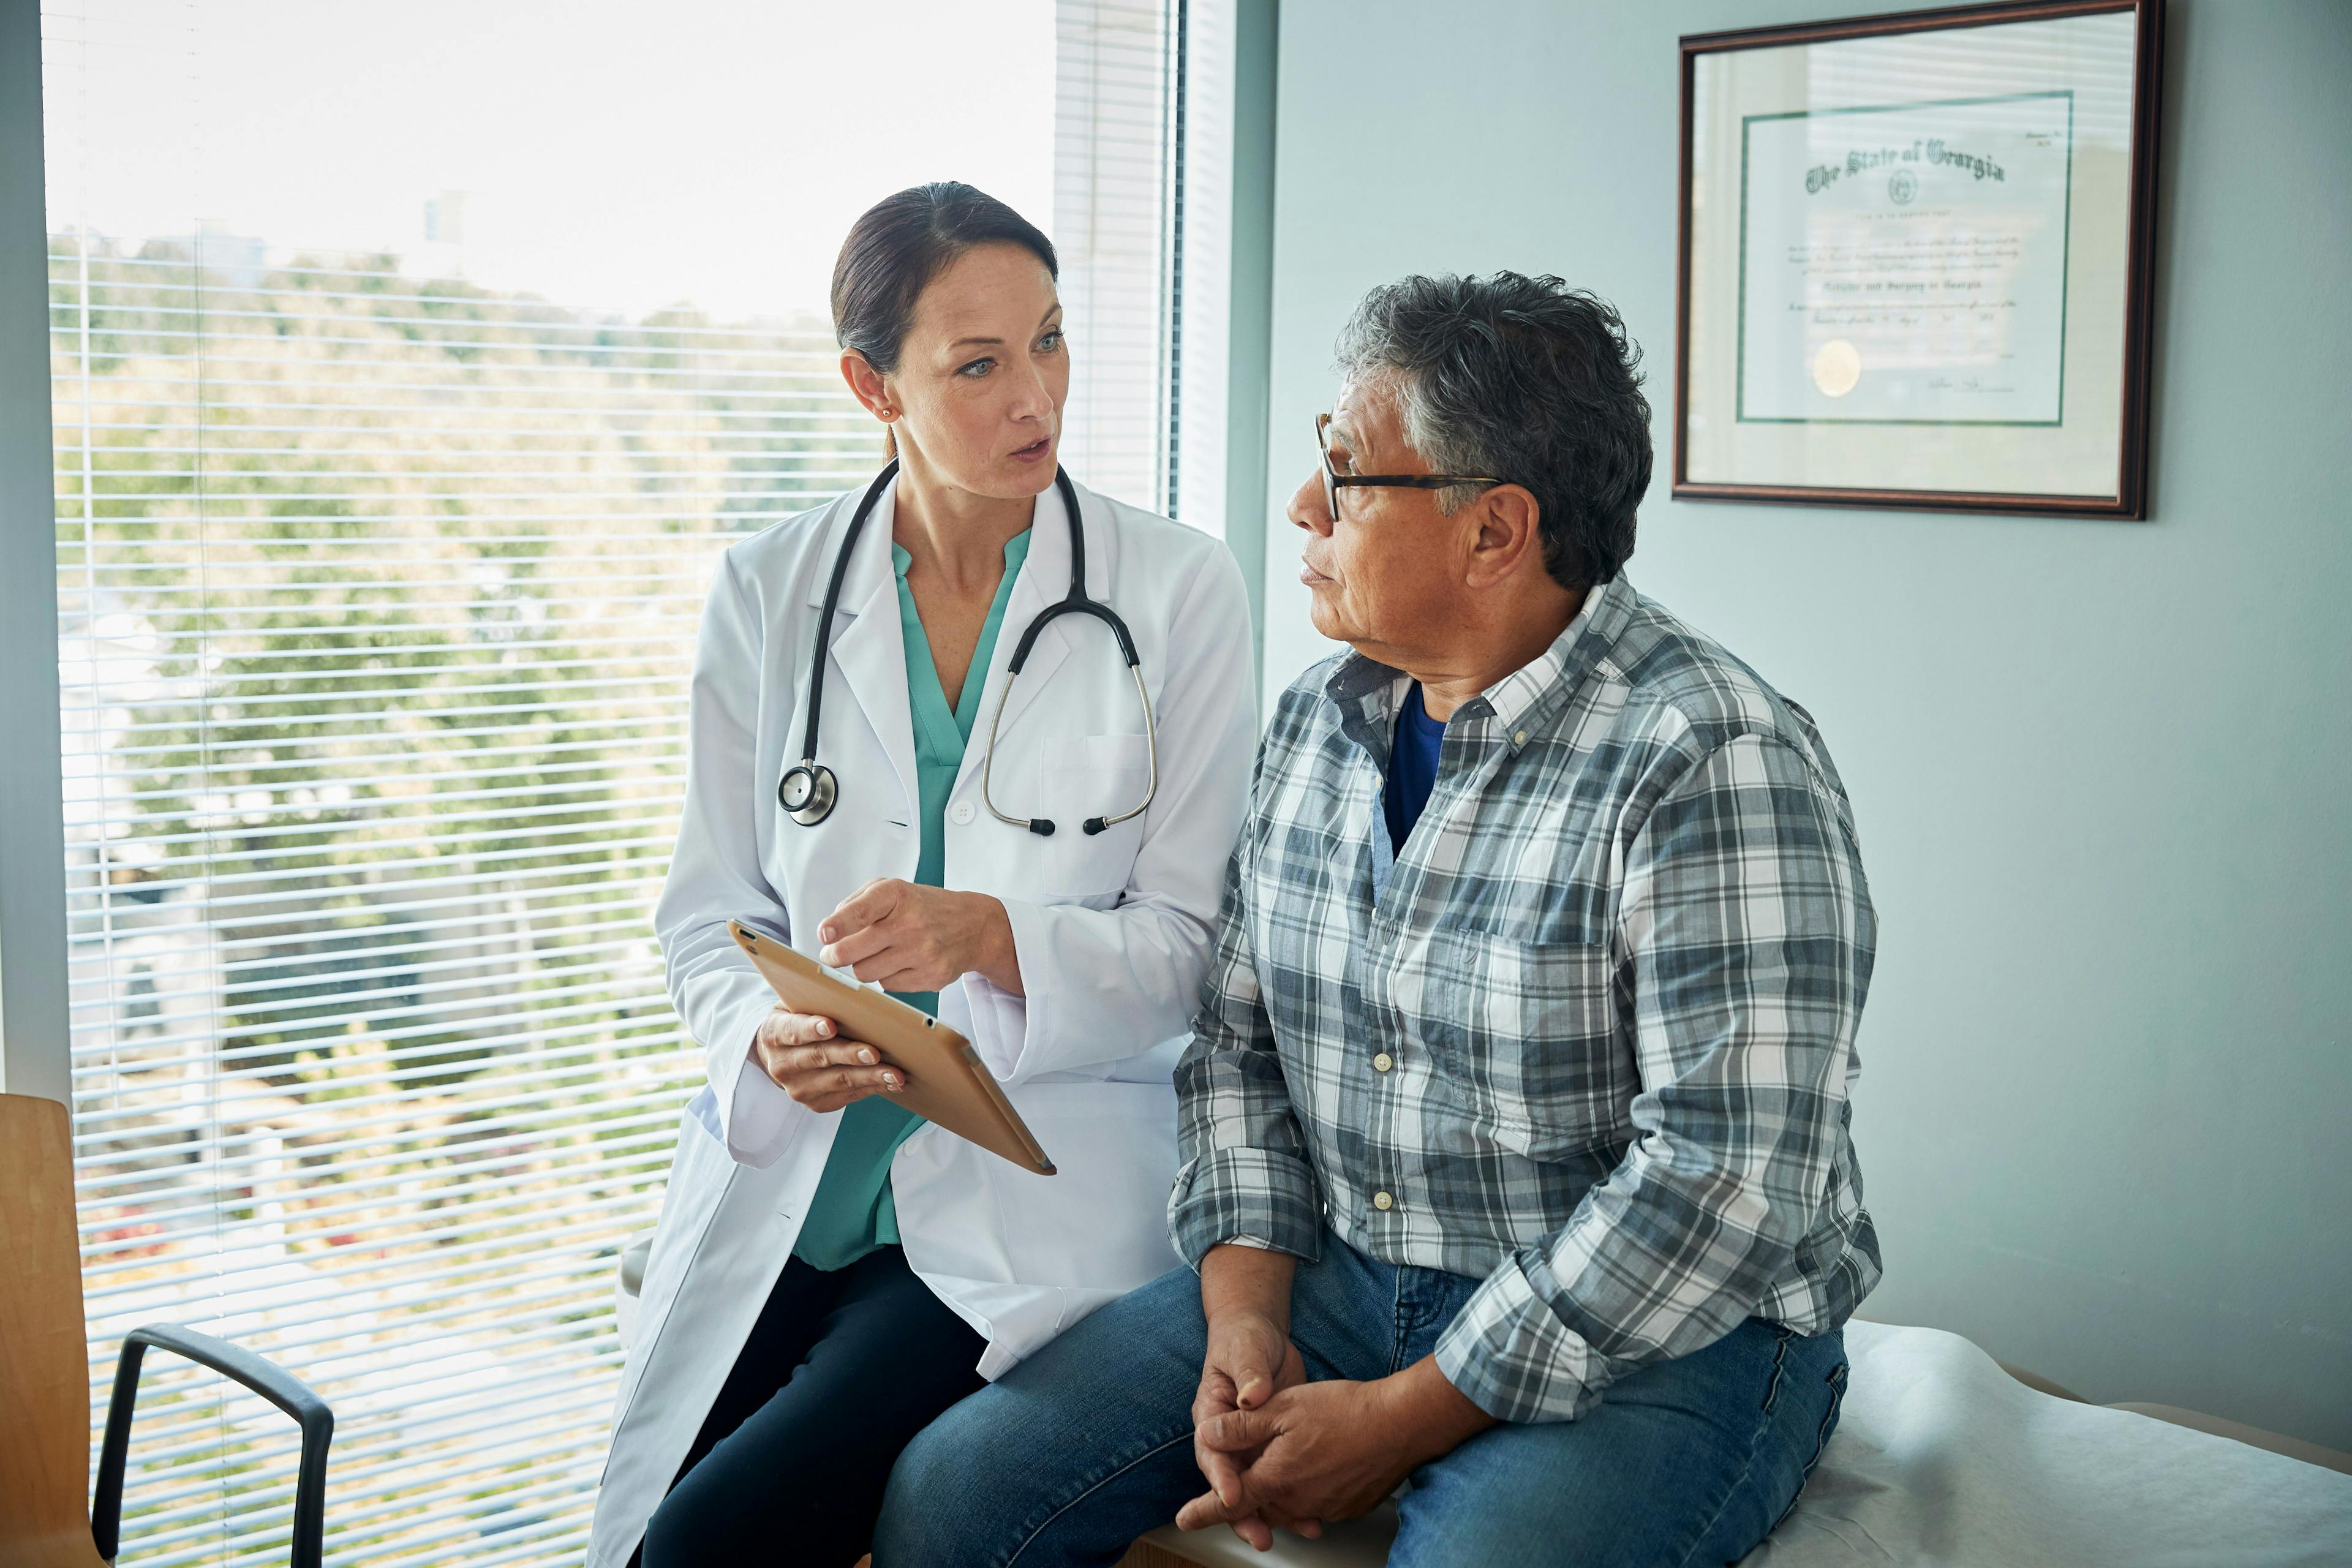 Several advocacy groups say planned cuts in Medicare payments to doctors would hurt access to patient care. (Image credit: ©Gregory Miller - stock.adobe.com)